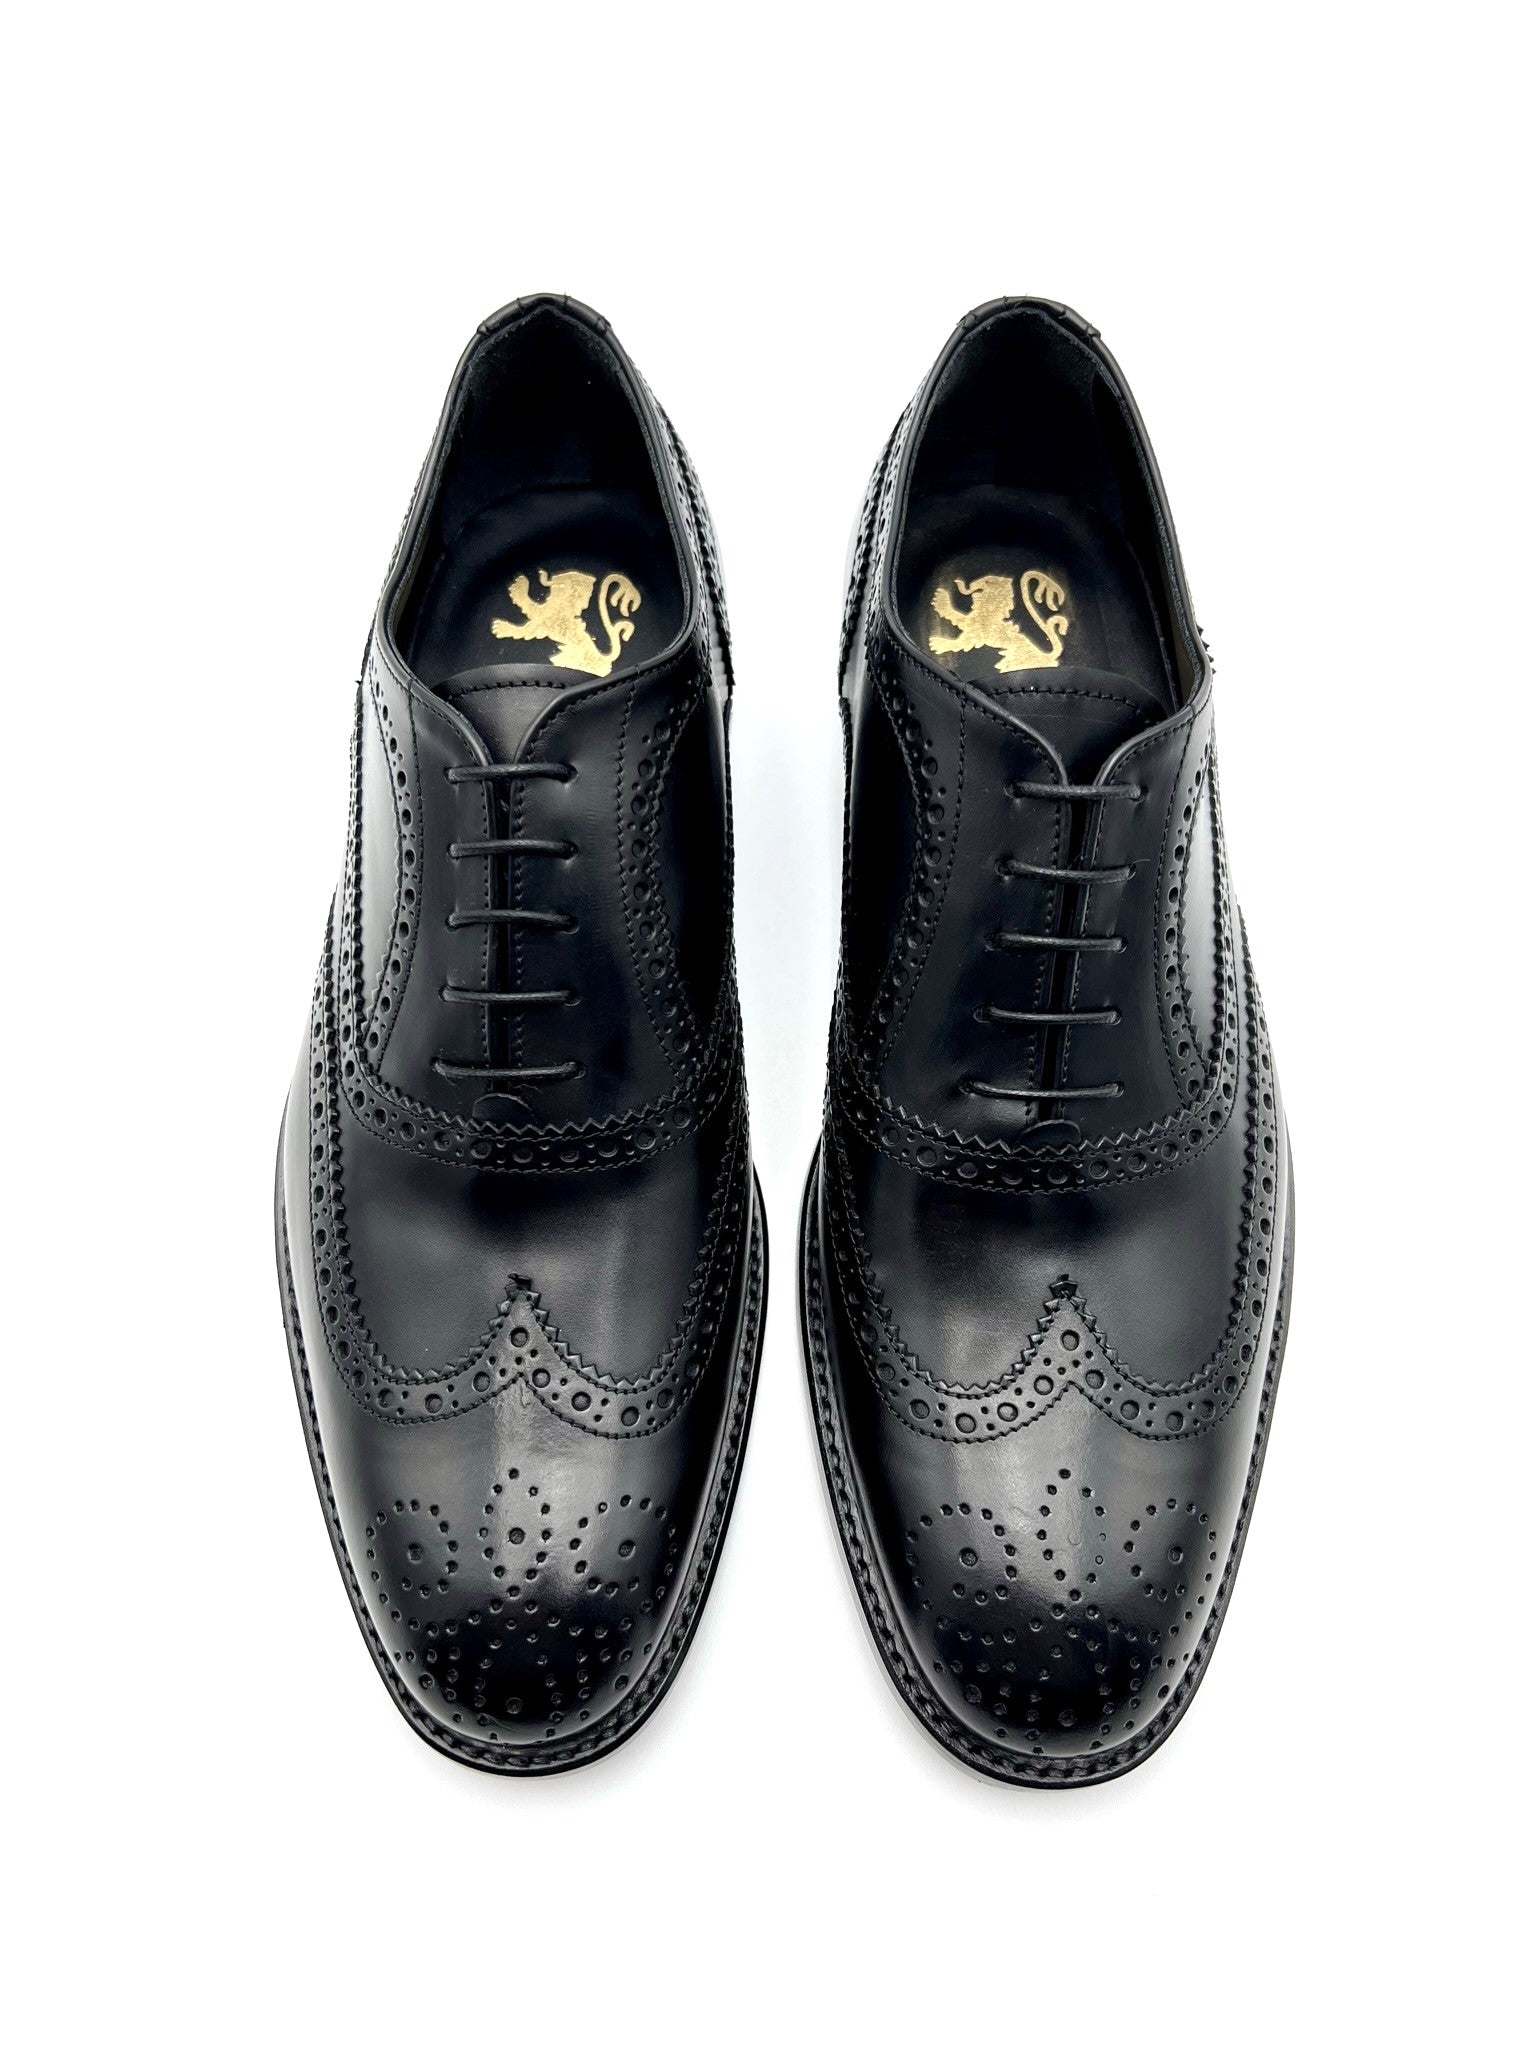 Oxford shoe in English style with dovetail hole and  flower in toe, 100% made in Italy, in genuine calfskin,  The leather sole with half rubber seedling makes it non-slip and the  seam BLAKE ensures the tightness of the bottom Process: blake- Leather: abrasive calf -  Color: black - Lining: black calf -  Bottom: leather - Insole: leather Handcrafted shoes, made in Italy with genuine 100% Italian leather.- Sartoria Dei Duchi-Atri